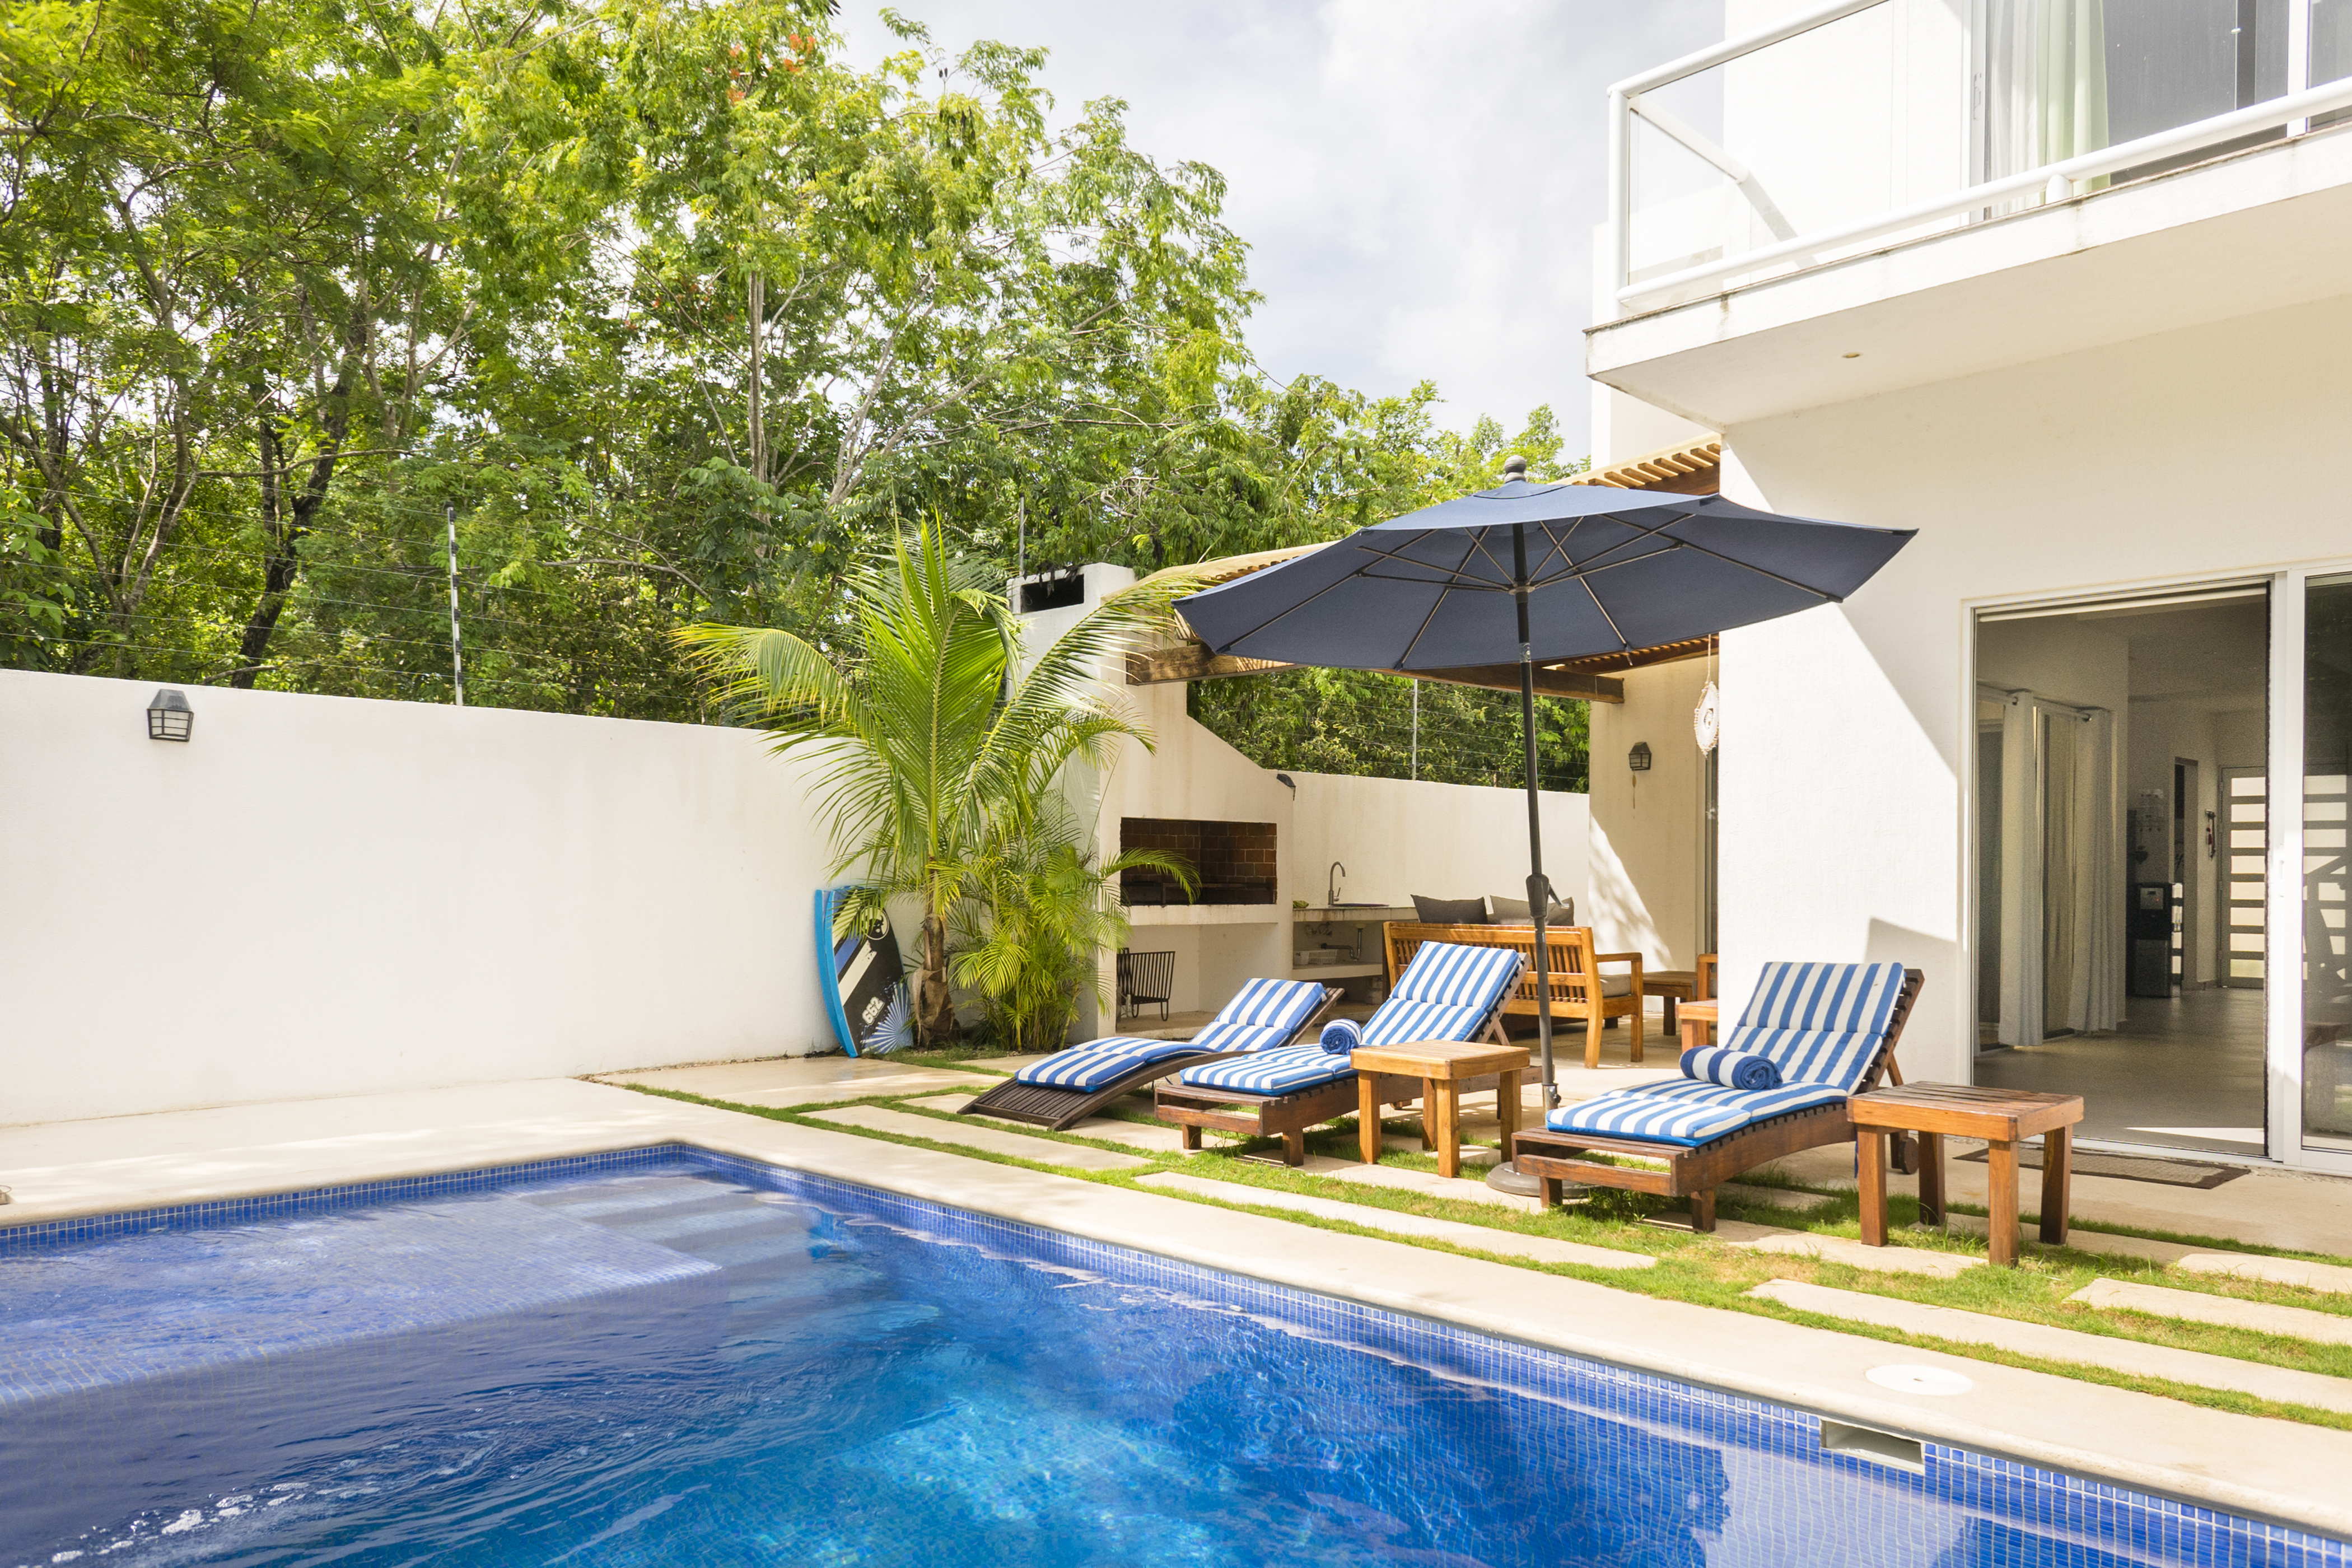 Casa Mia Gorgeous Private Home & Pool, BBQ - Houses for Rent in Tulum,  Quintana Roo, Mexico